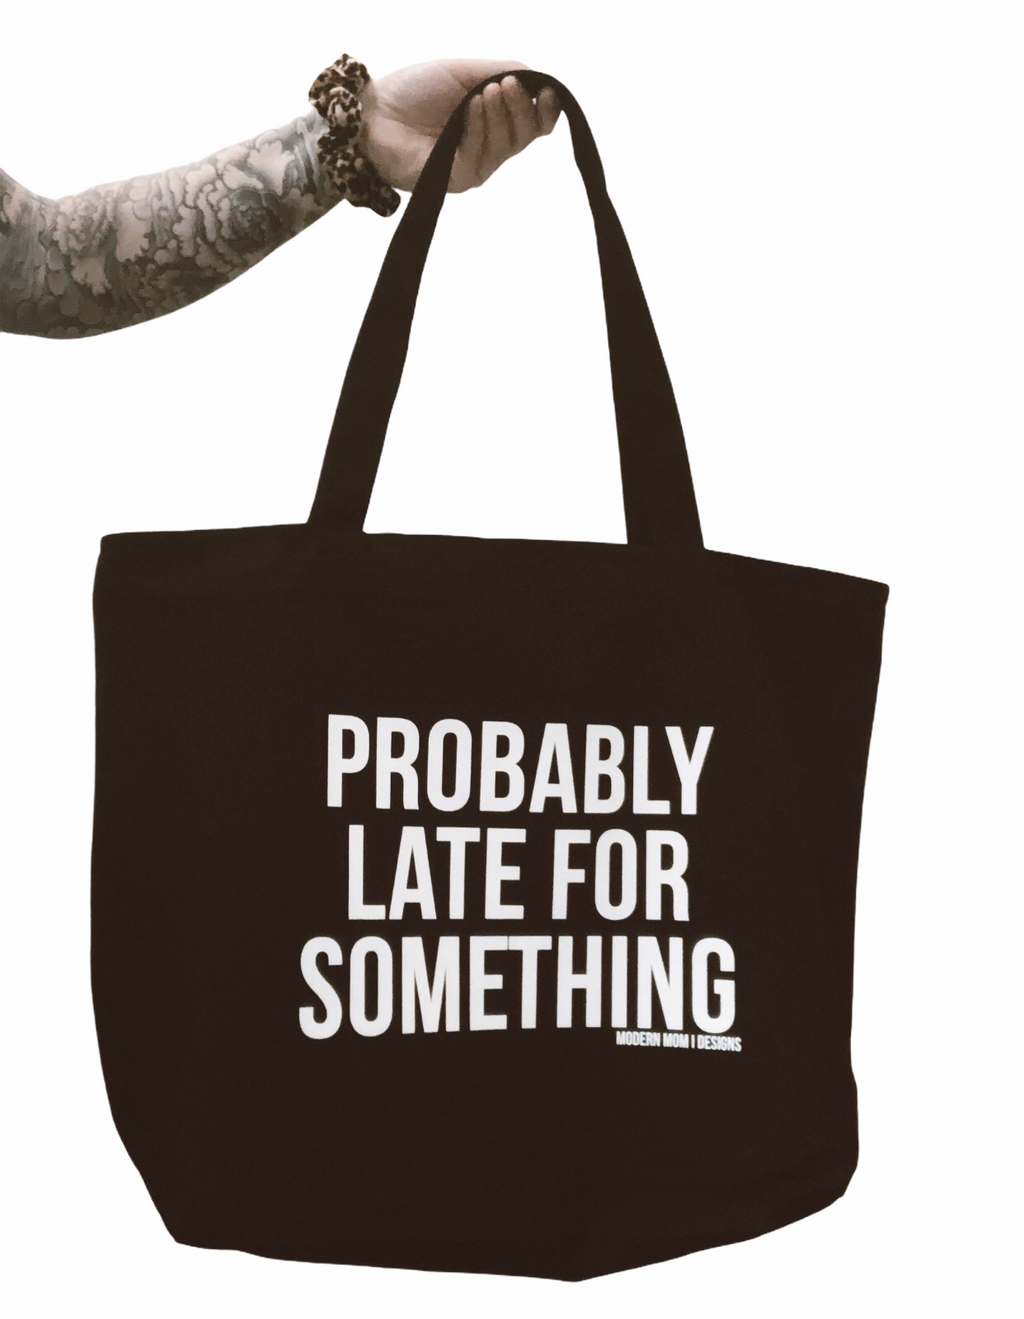 Probably late for something. Canvas tote